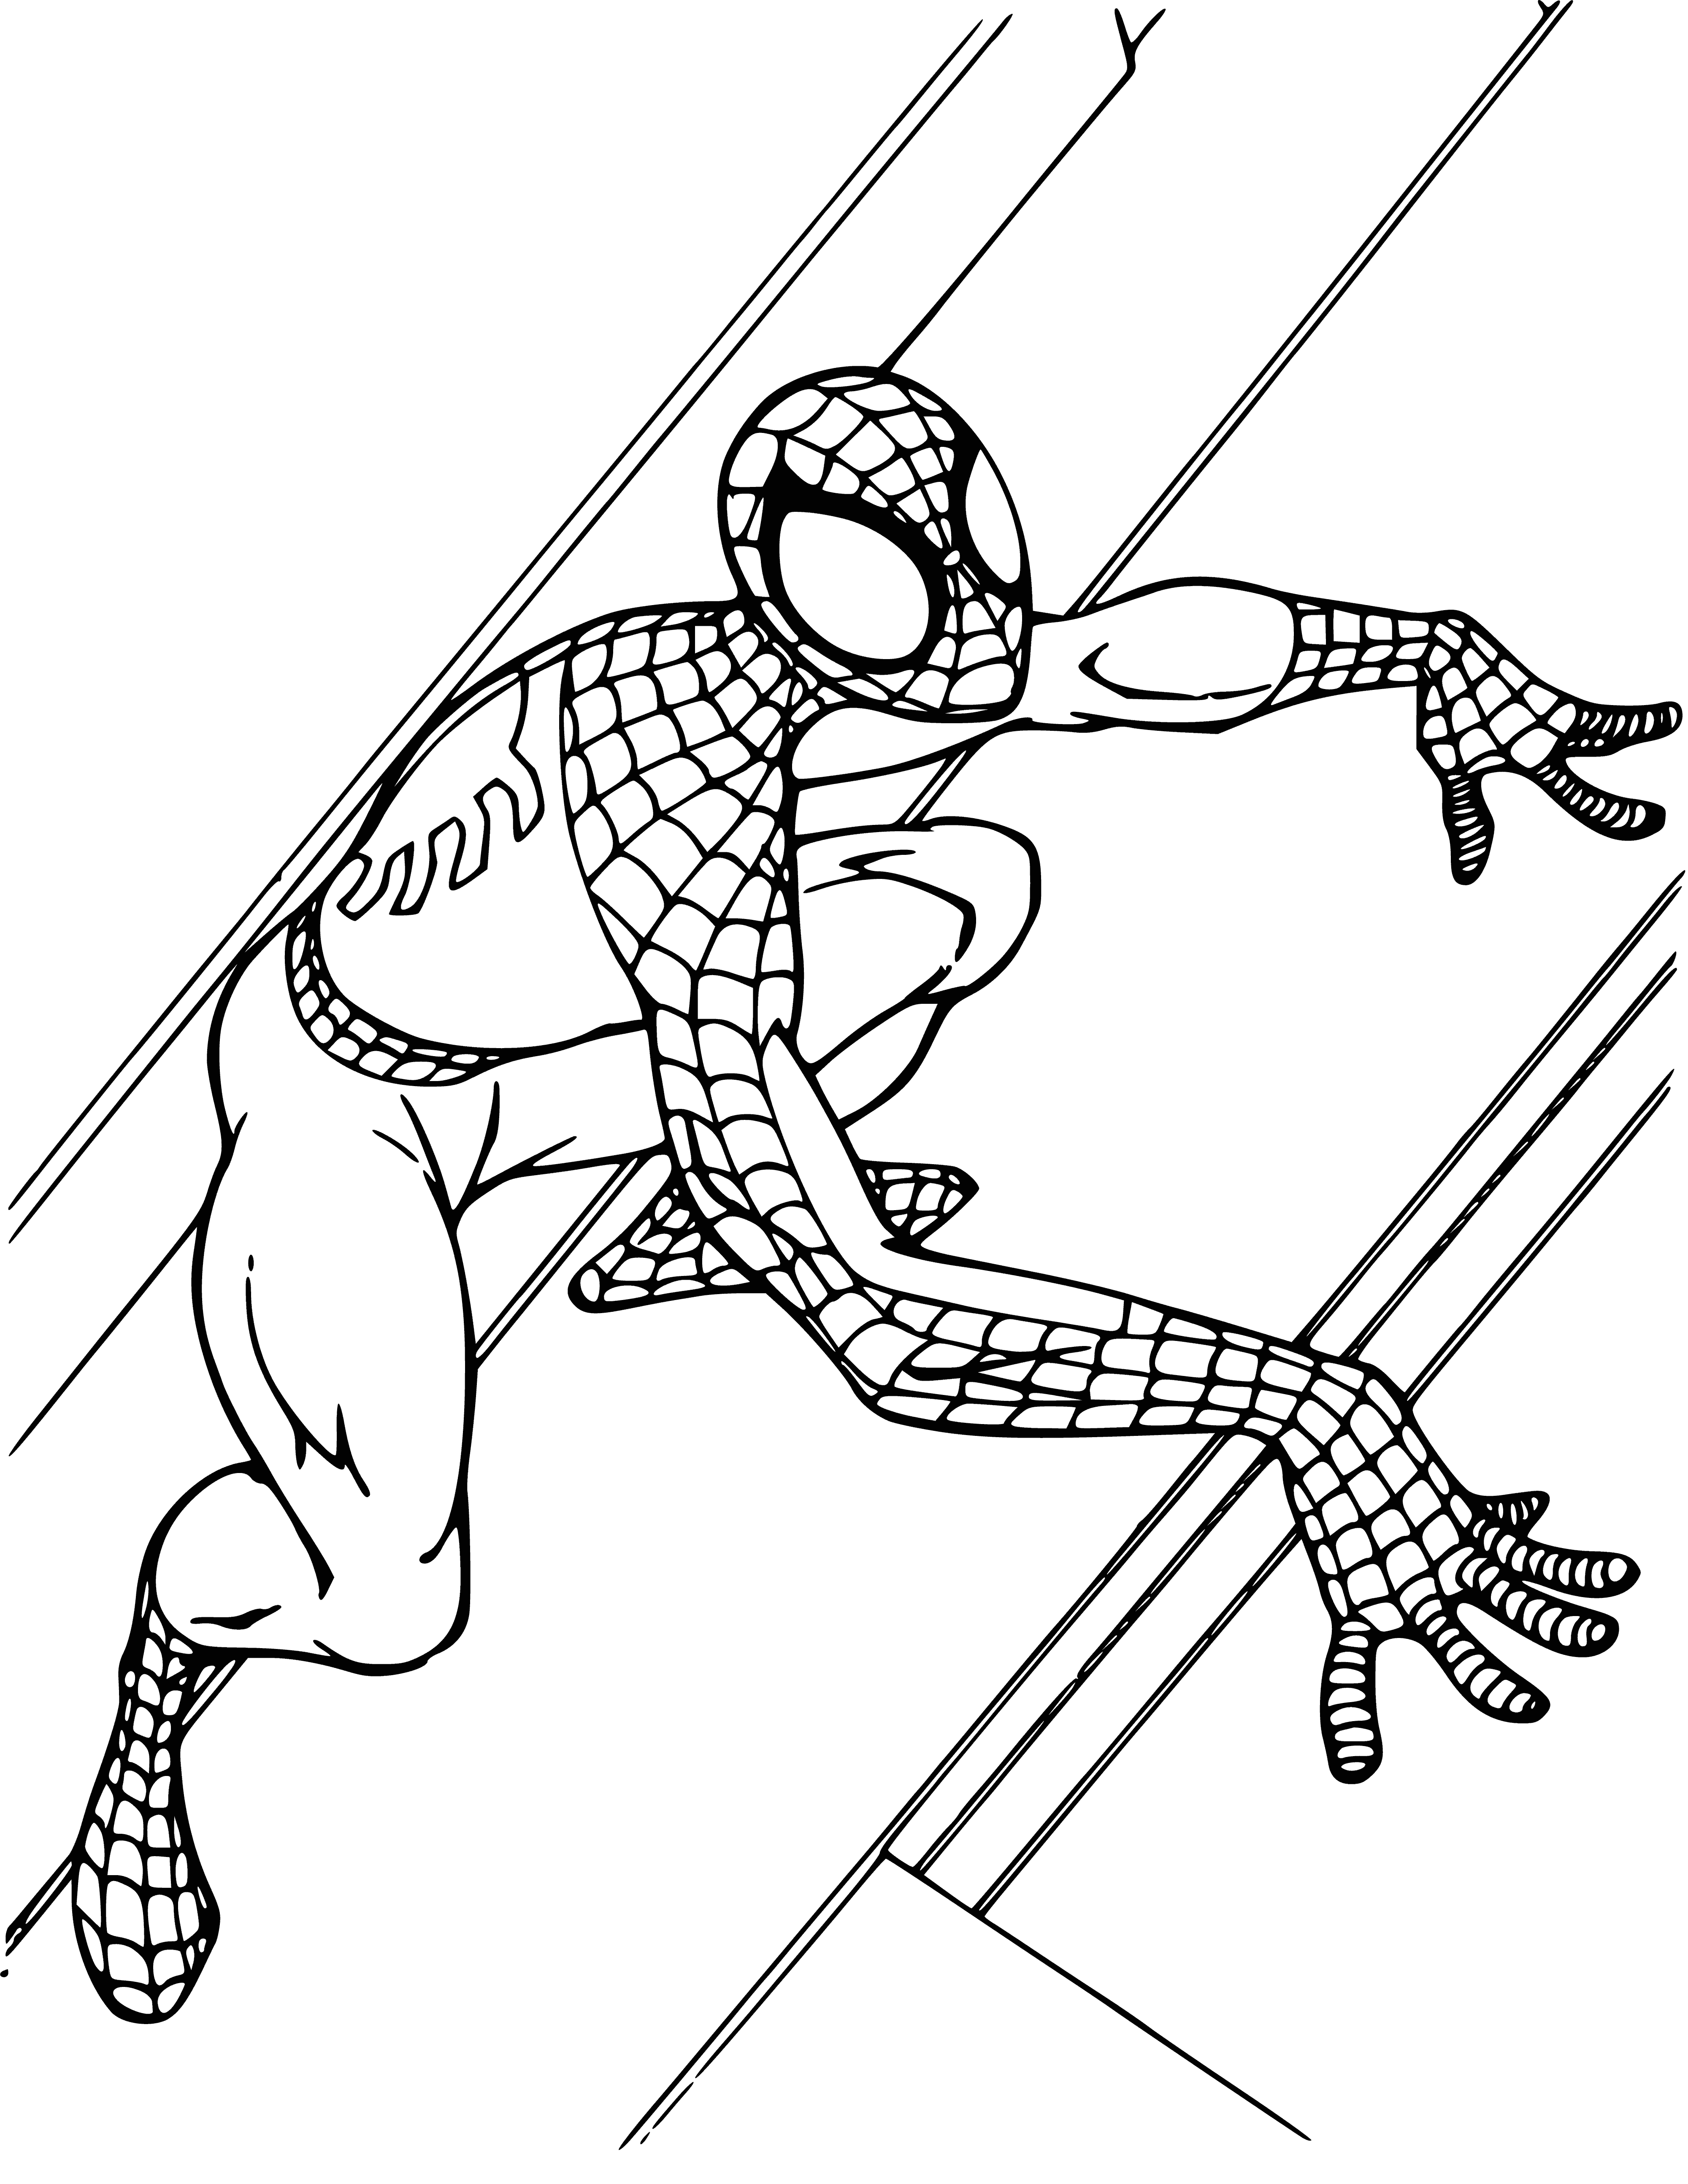 coloring page: Spidey flies, masked and powerful, through the air over tall city buildings. White spider-symbol front & back.